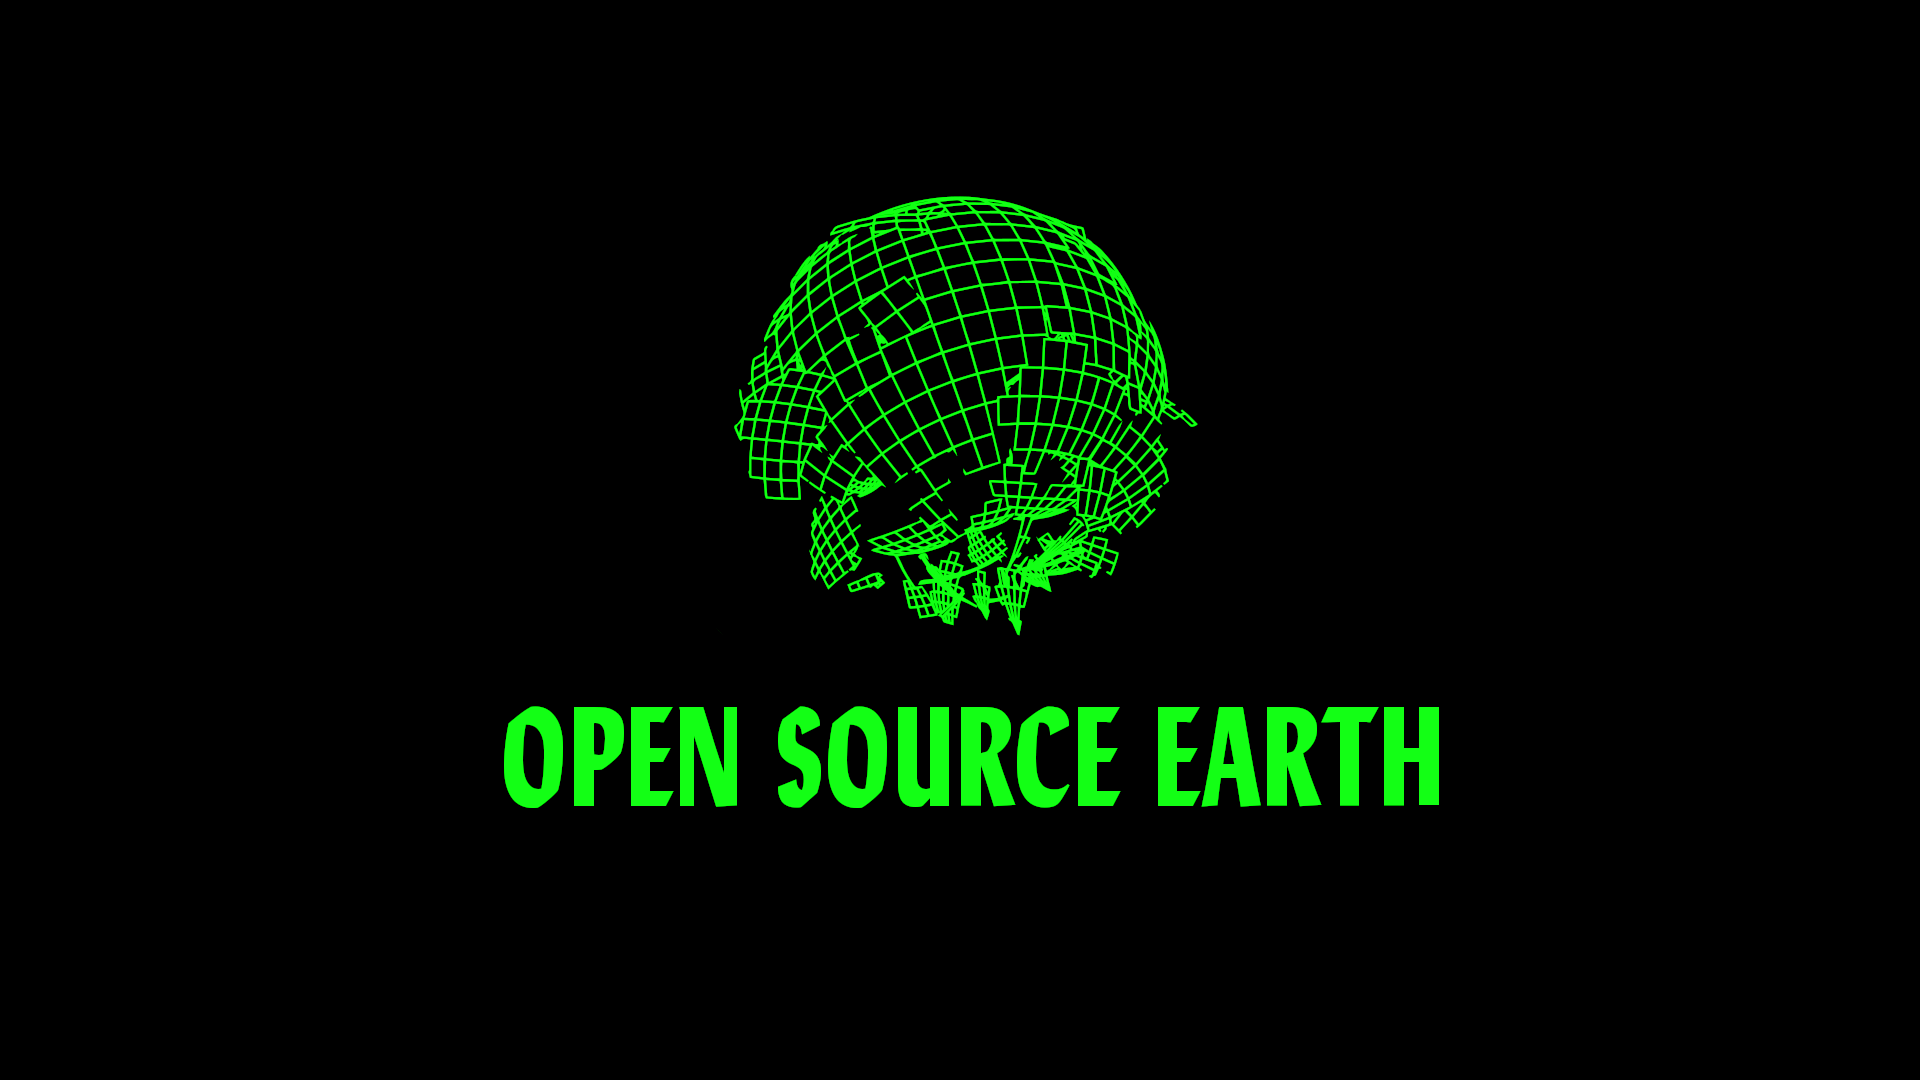 Tech Minimalism Open Source Grid Sphere Simple Background Green Black Background 1920x1080